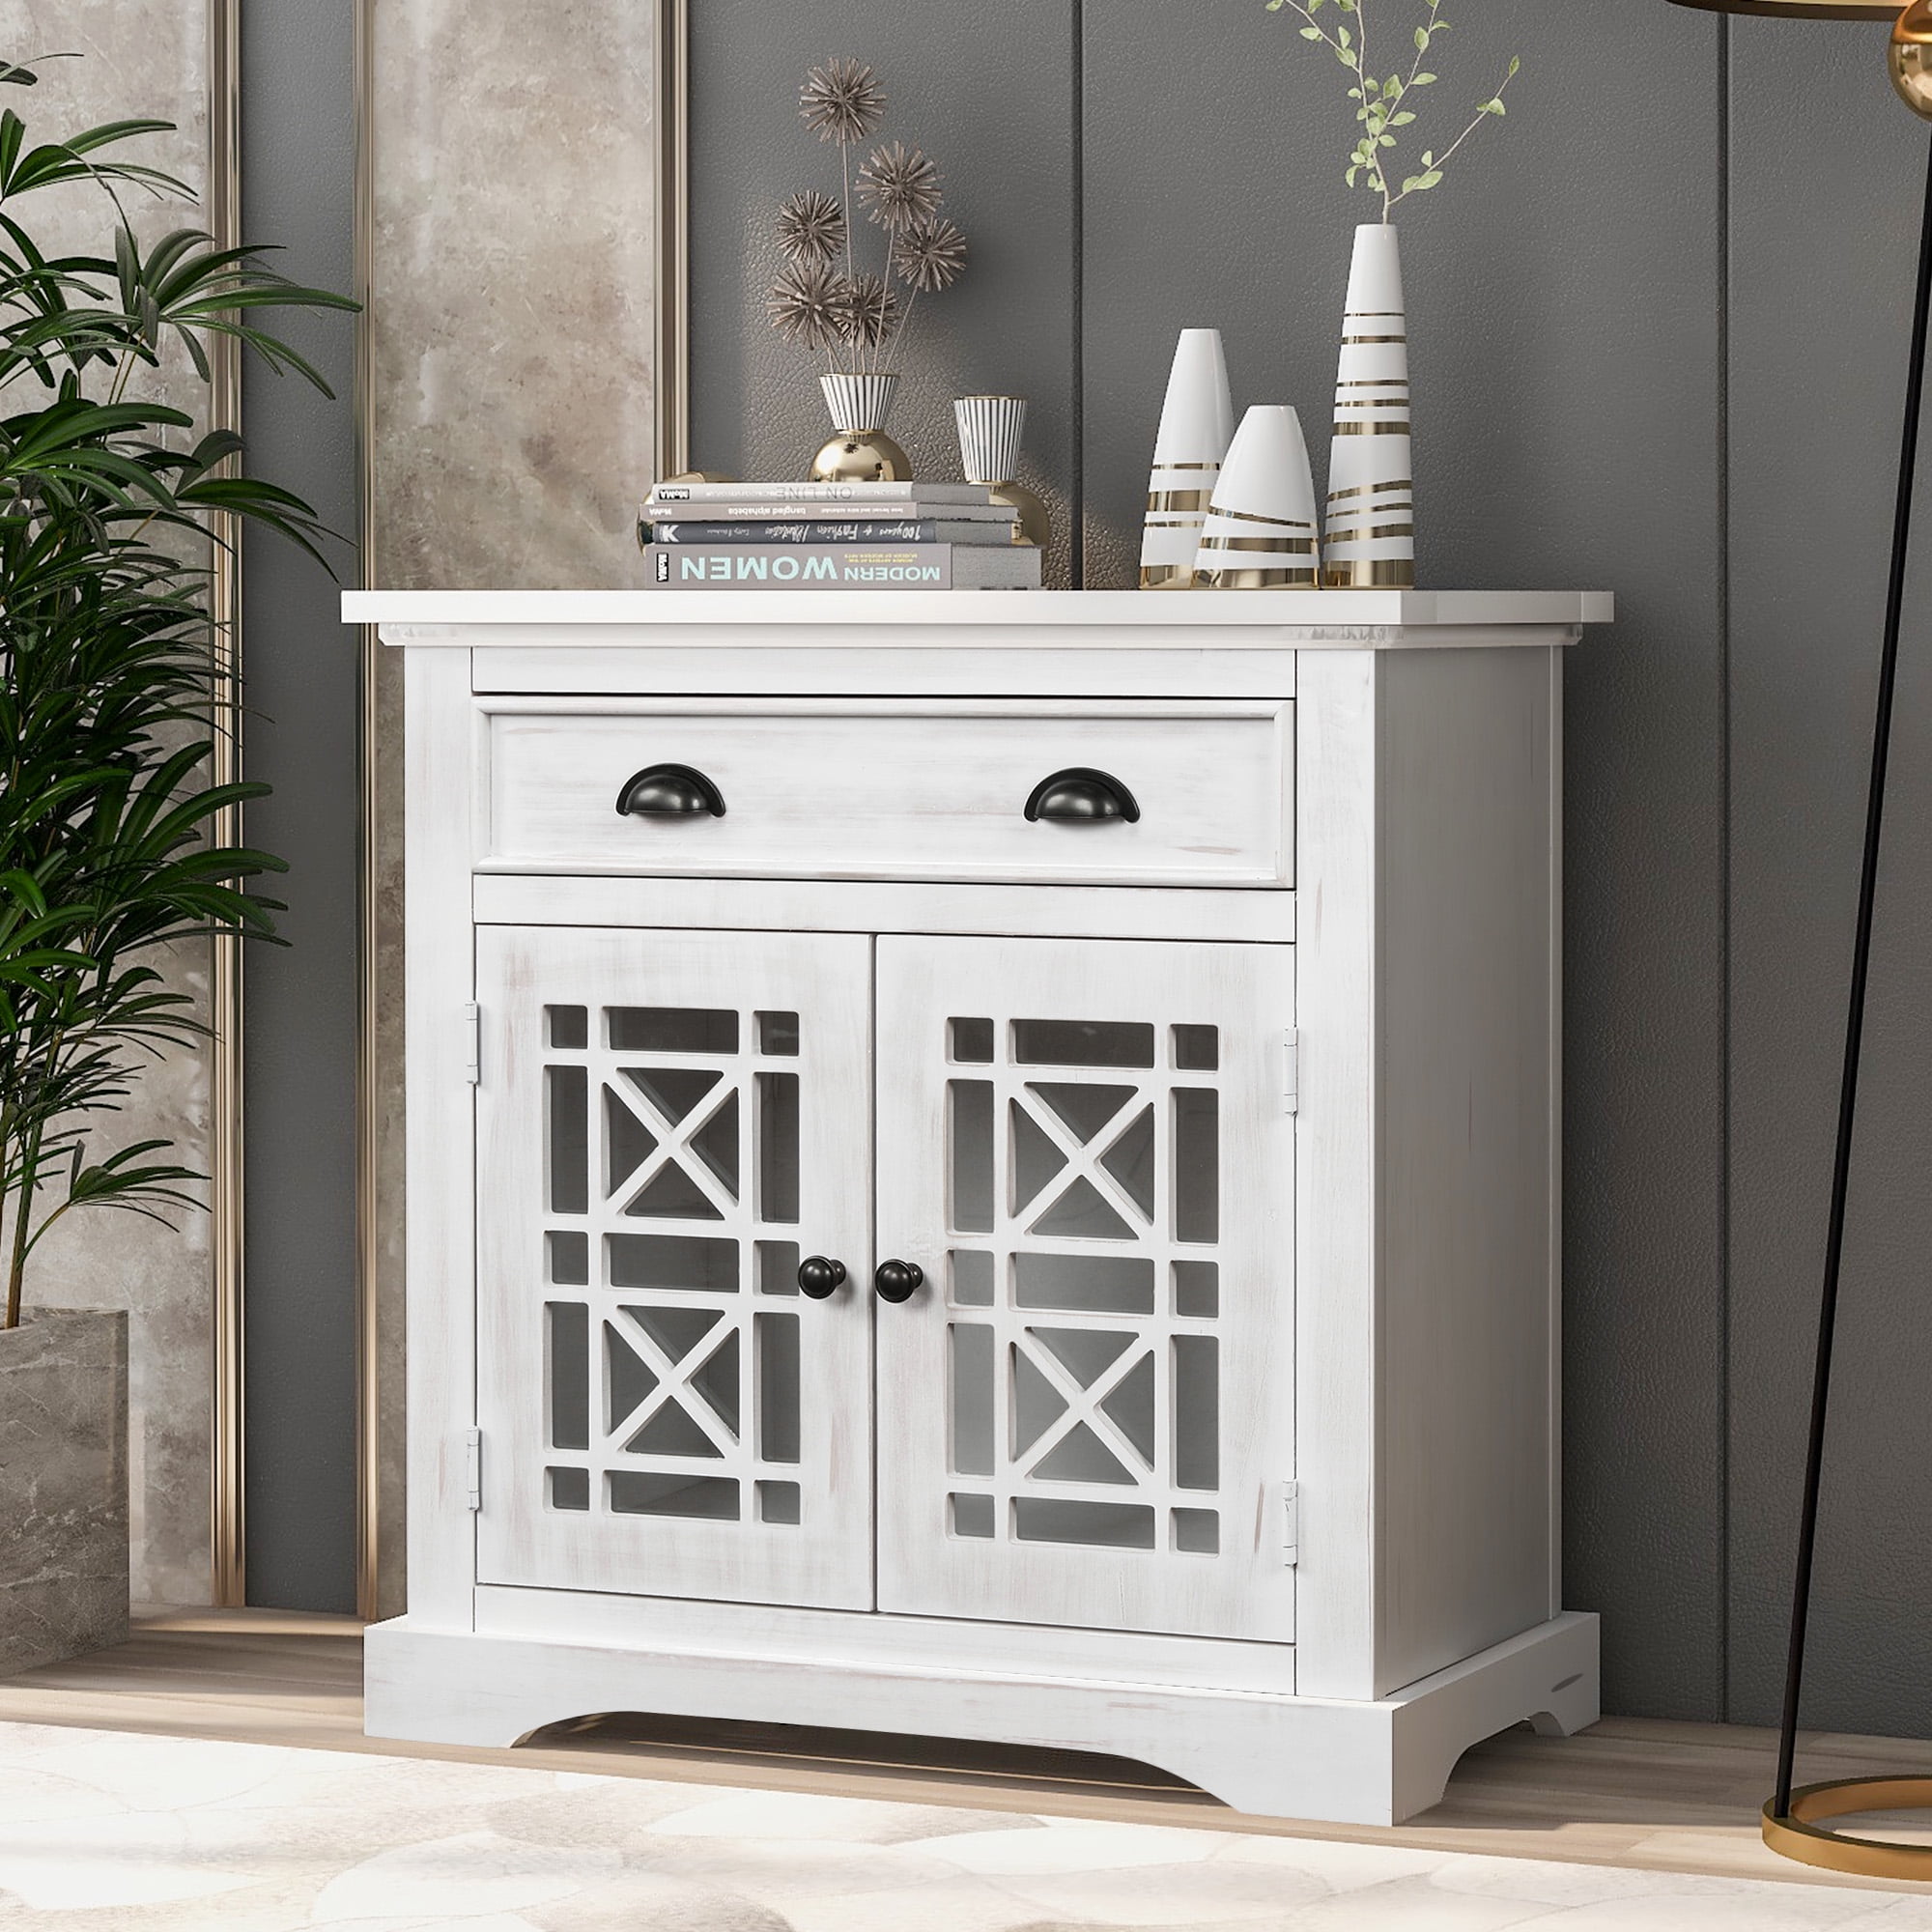 Bathroom Drawer Sideboard Dressers Chest of drawers white MDF 2 doors Kitchen Cabinet in Country House Style Bathroom Floor Storage Cabinet 